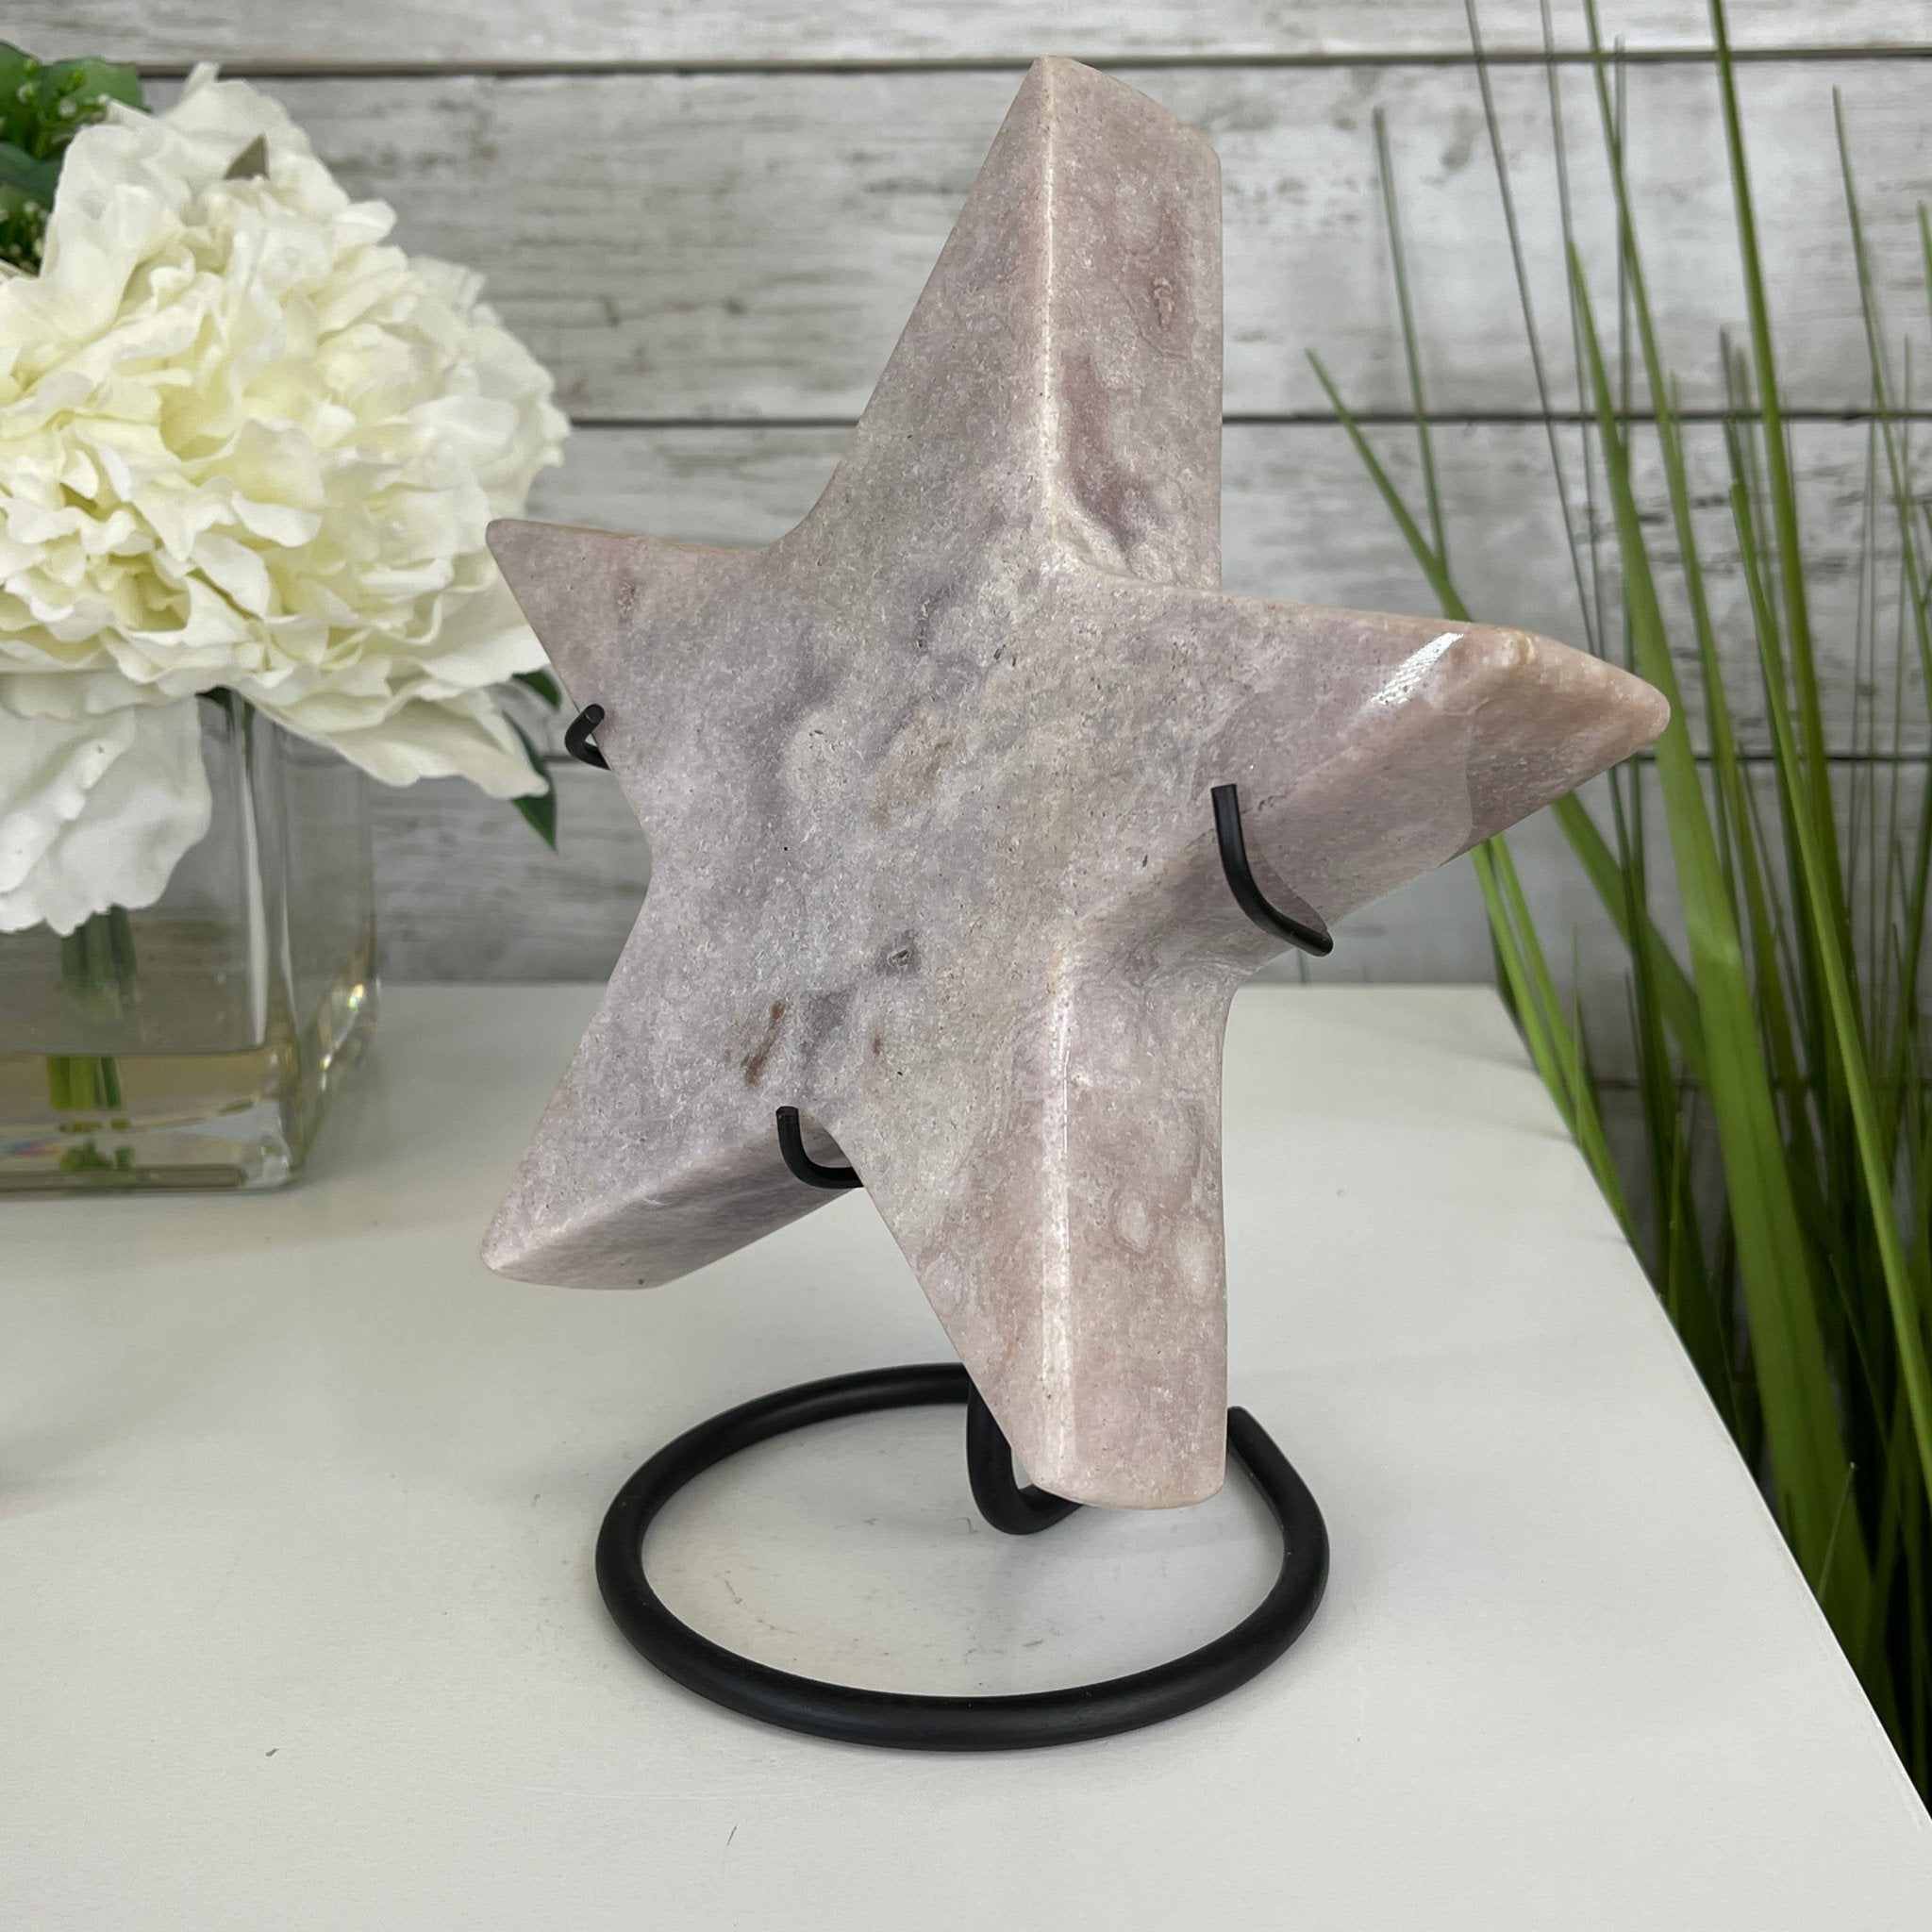 Pink Amethyst Star on a Metal Stand 8.25" Tall #5746-0020 by Brazil Gems - Brazil GemsBrazil GemsPink Amethyst Star on a Metal Stand 8.25" Tall #5746-0020 by Brazil GemsStars5746-0020